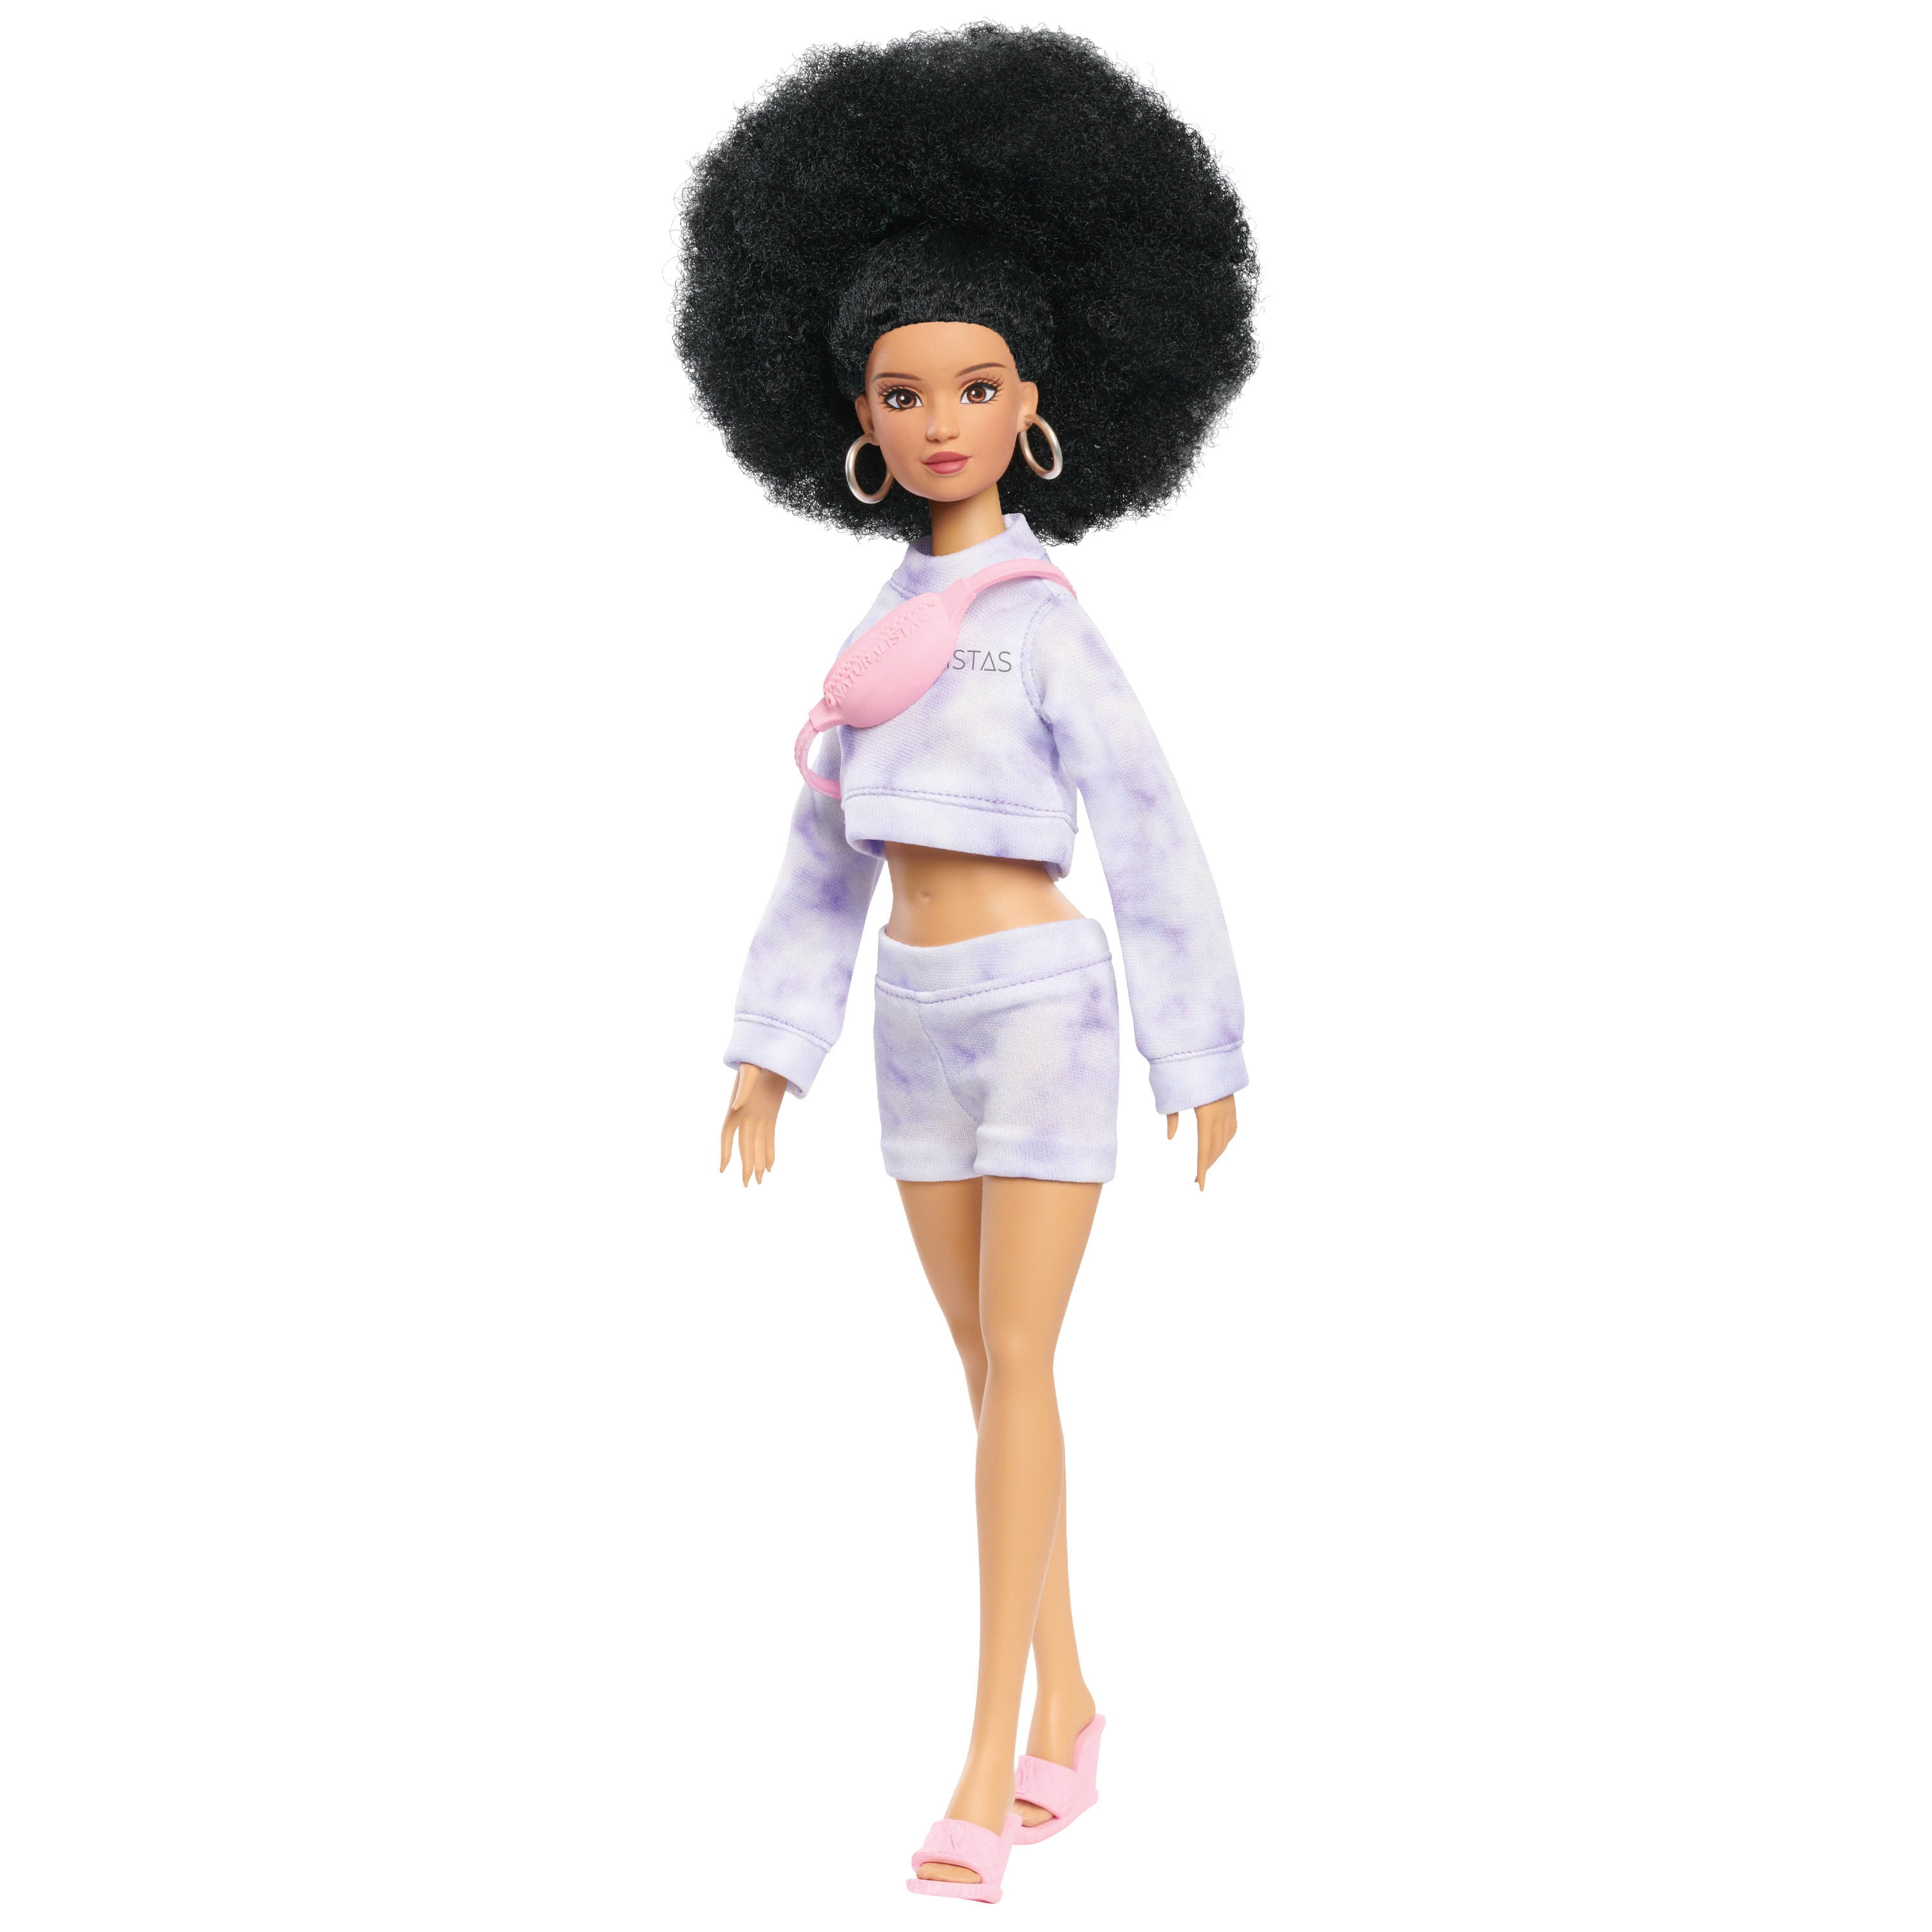 Naturalistas Pixie Puff Collection 11-inch Penny Fashion Doll and Accessories with 4C Textured Hair and Light Brown Skin Tone